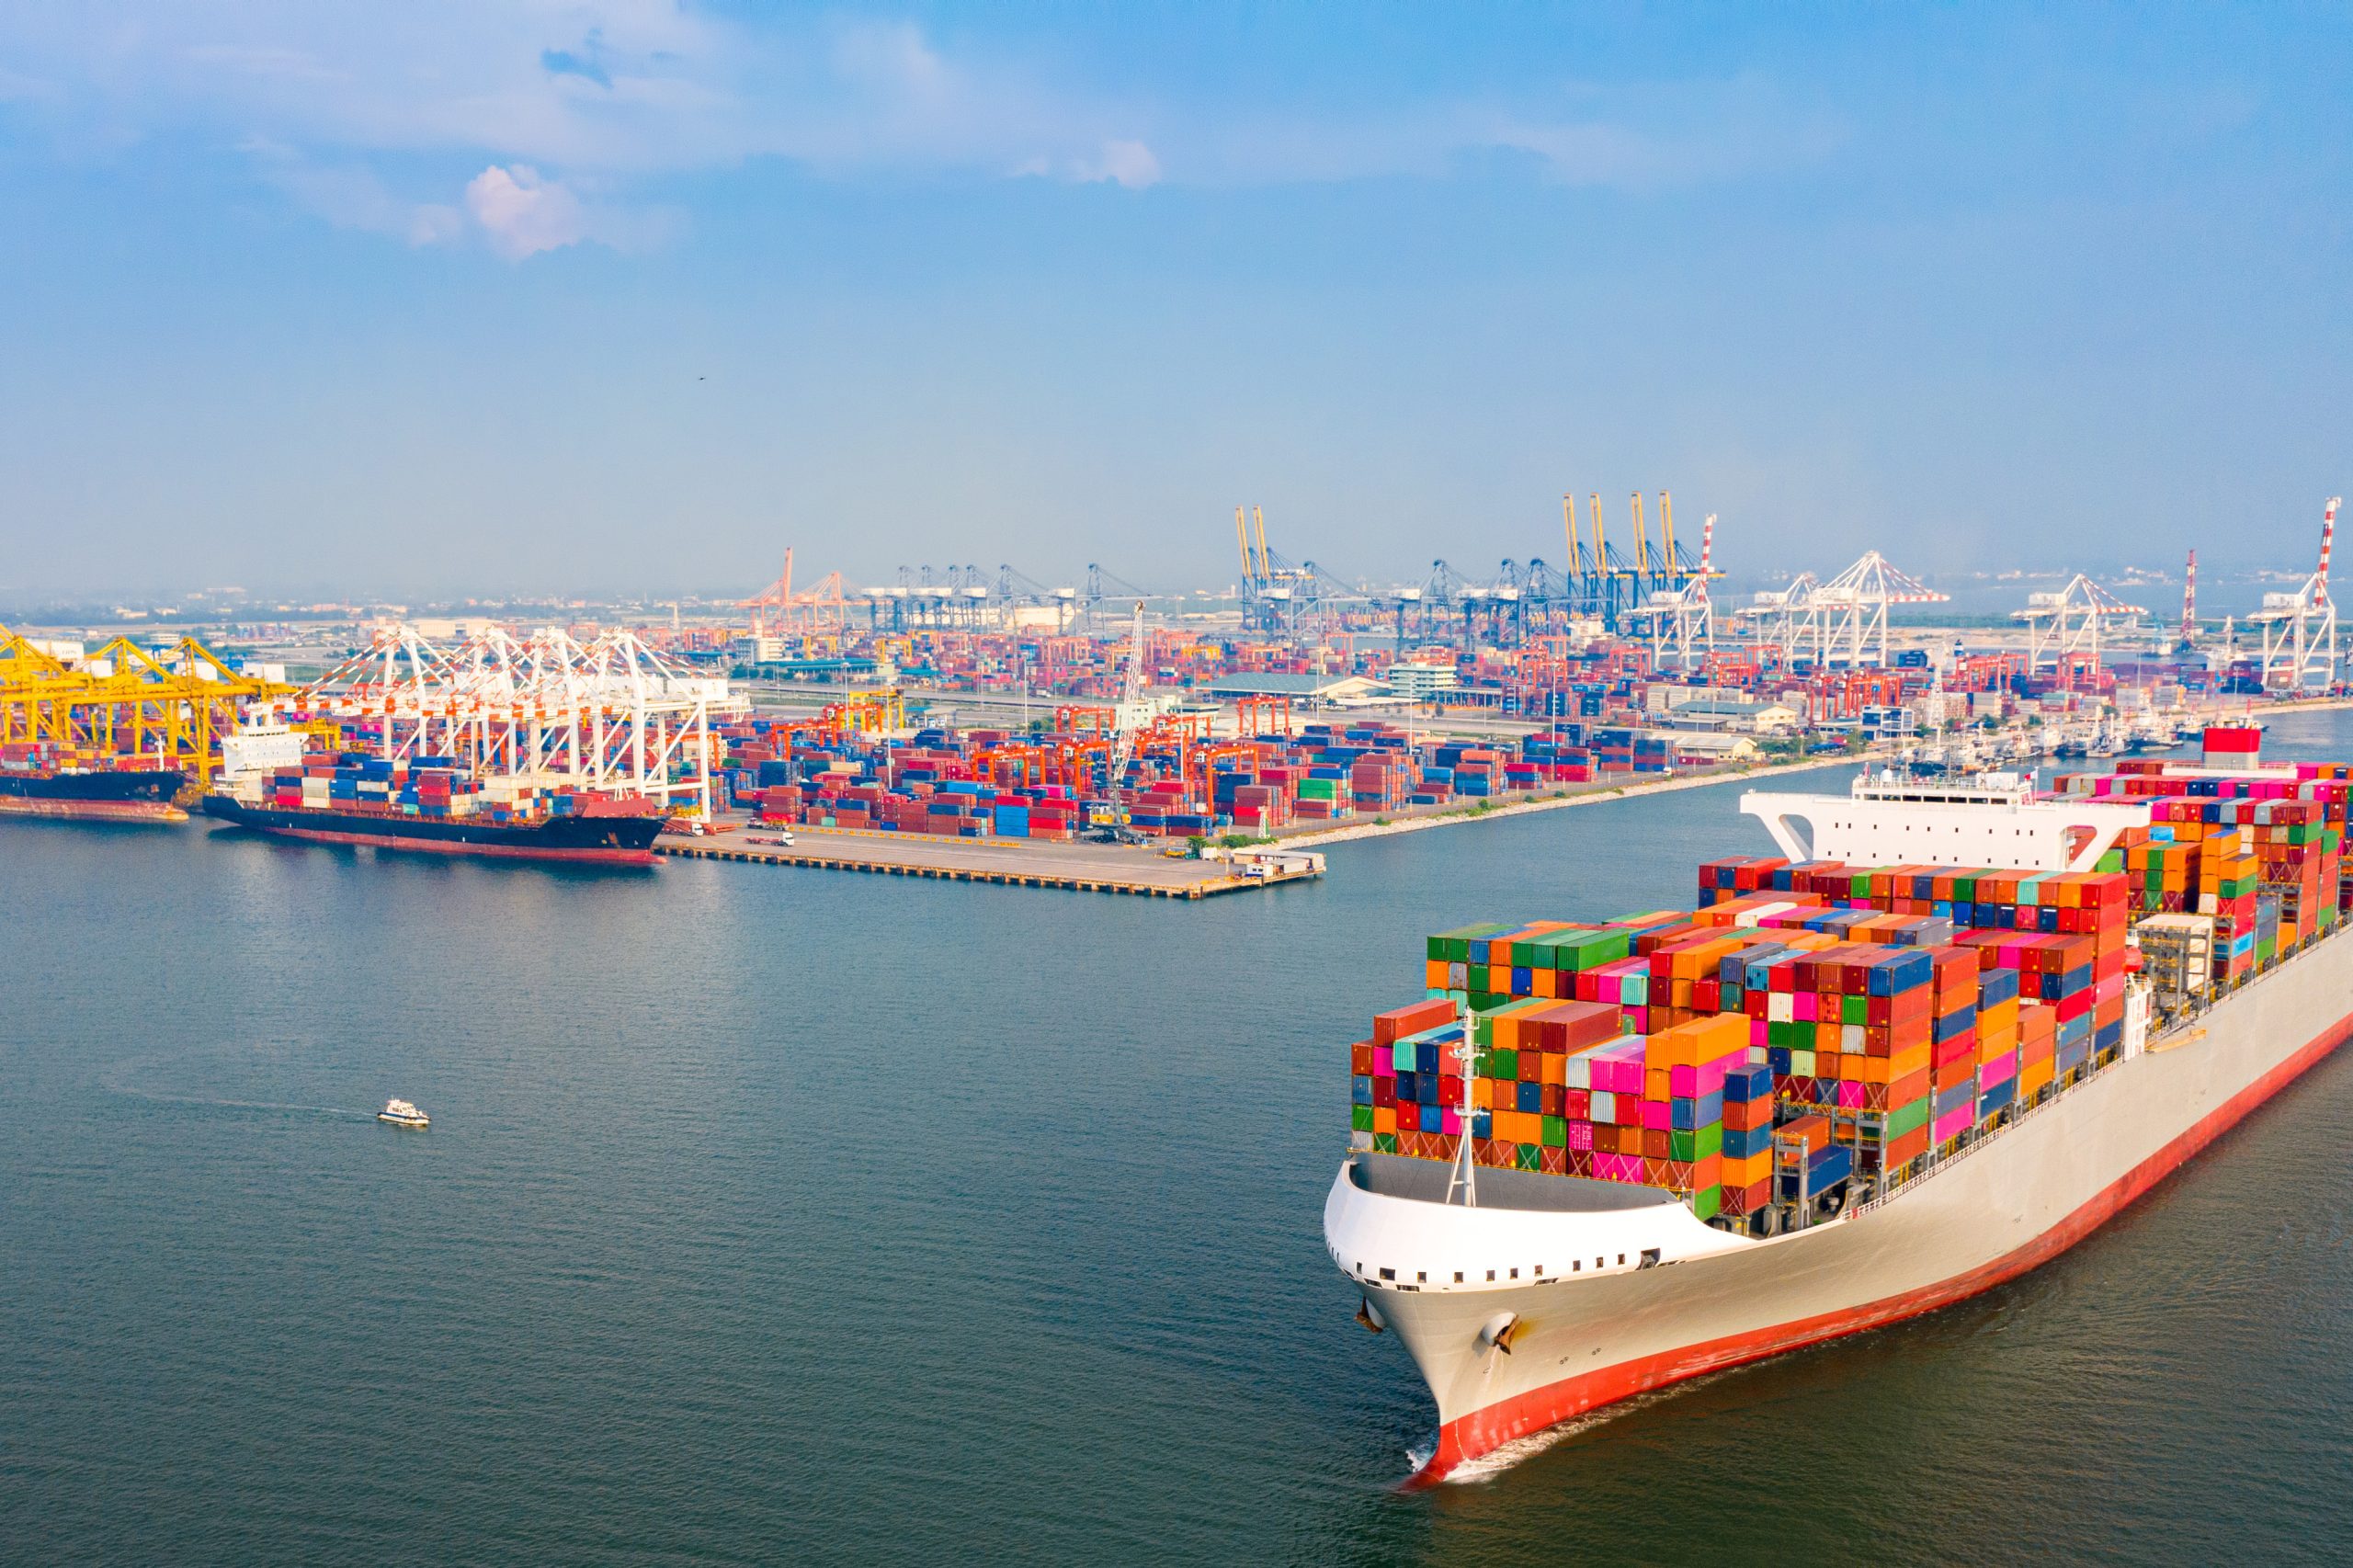 Global economic recovery hindered by lines skipping ports, new report reveals